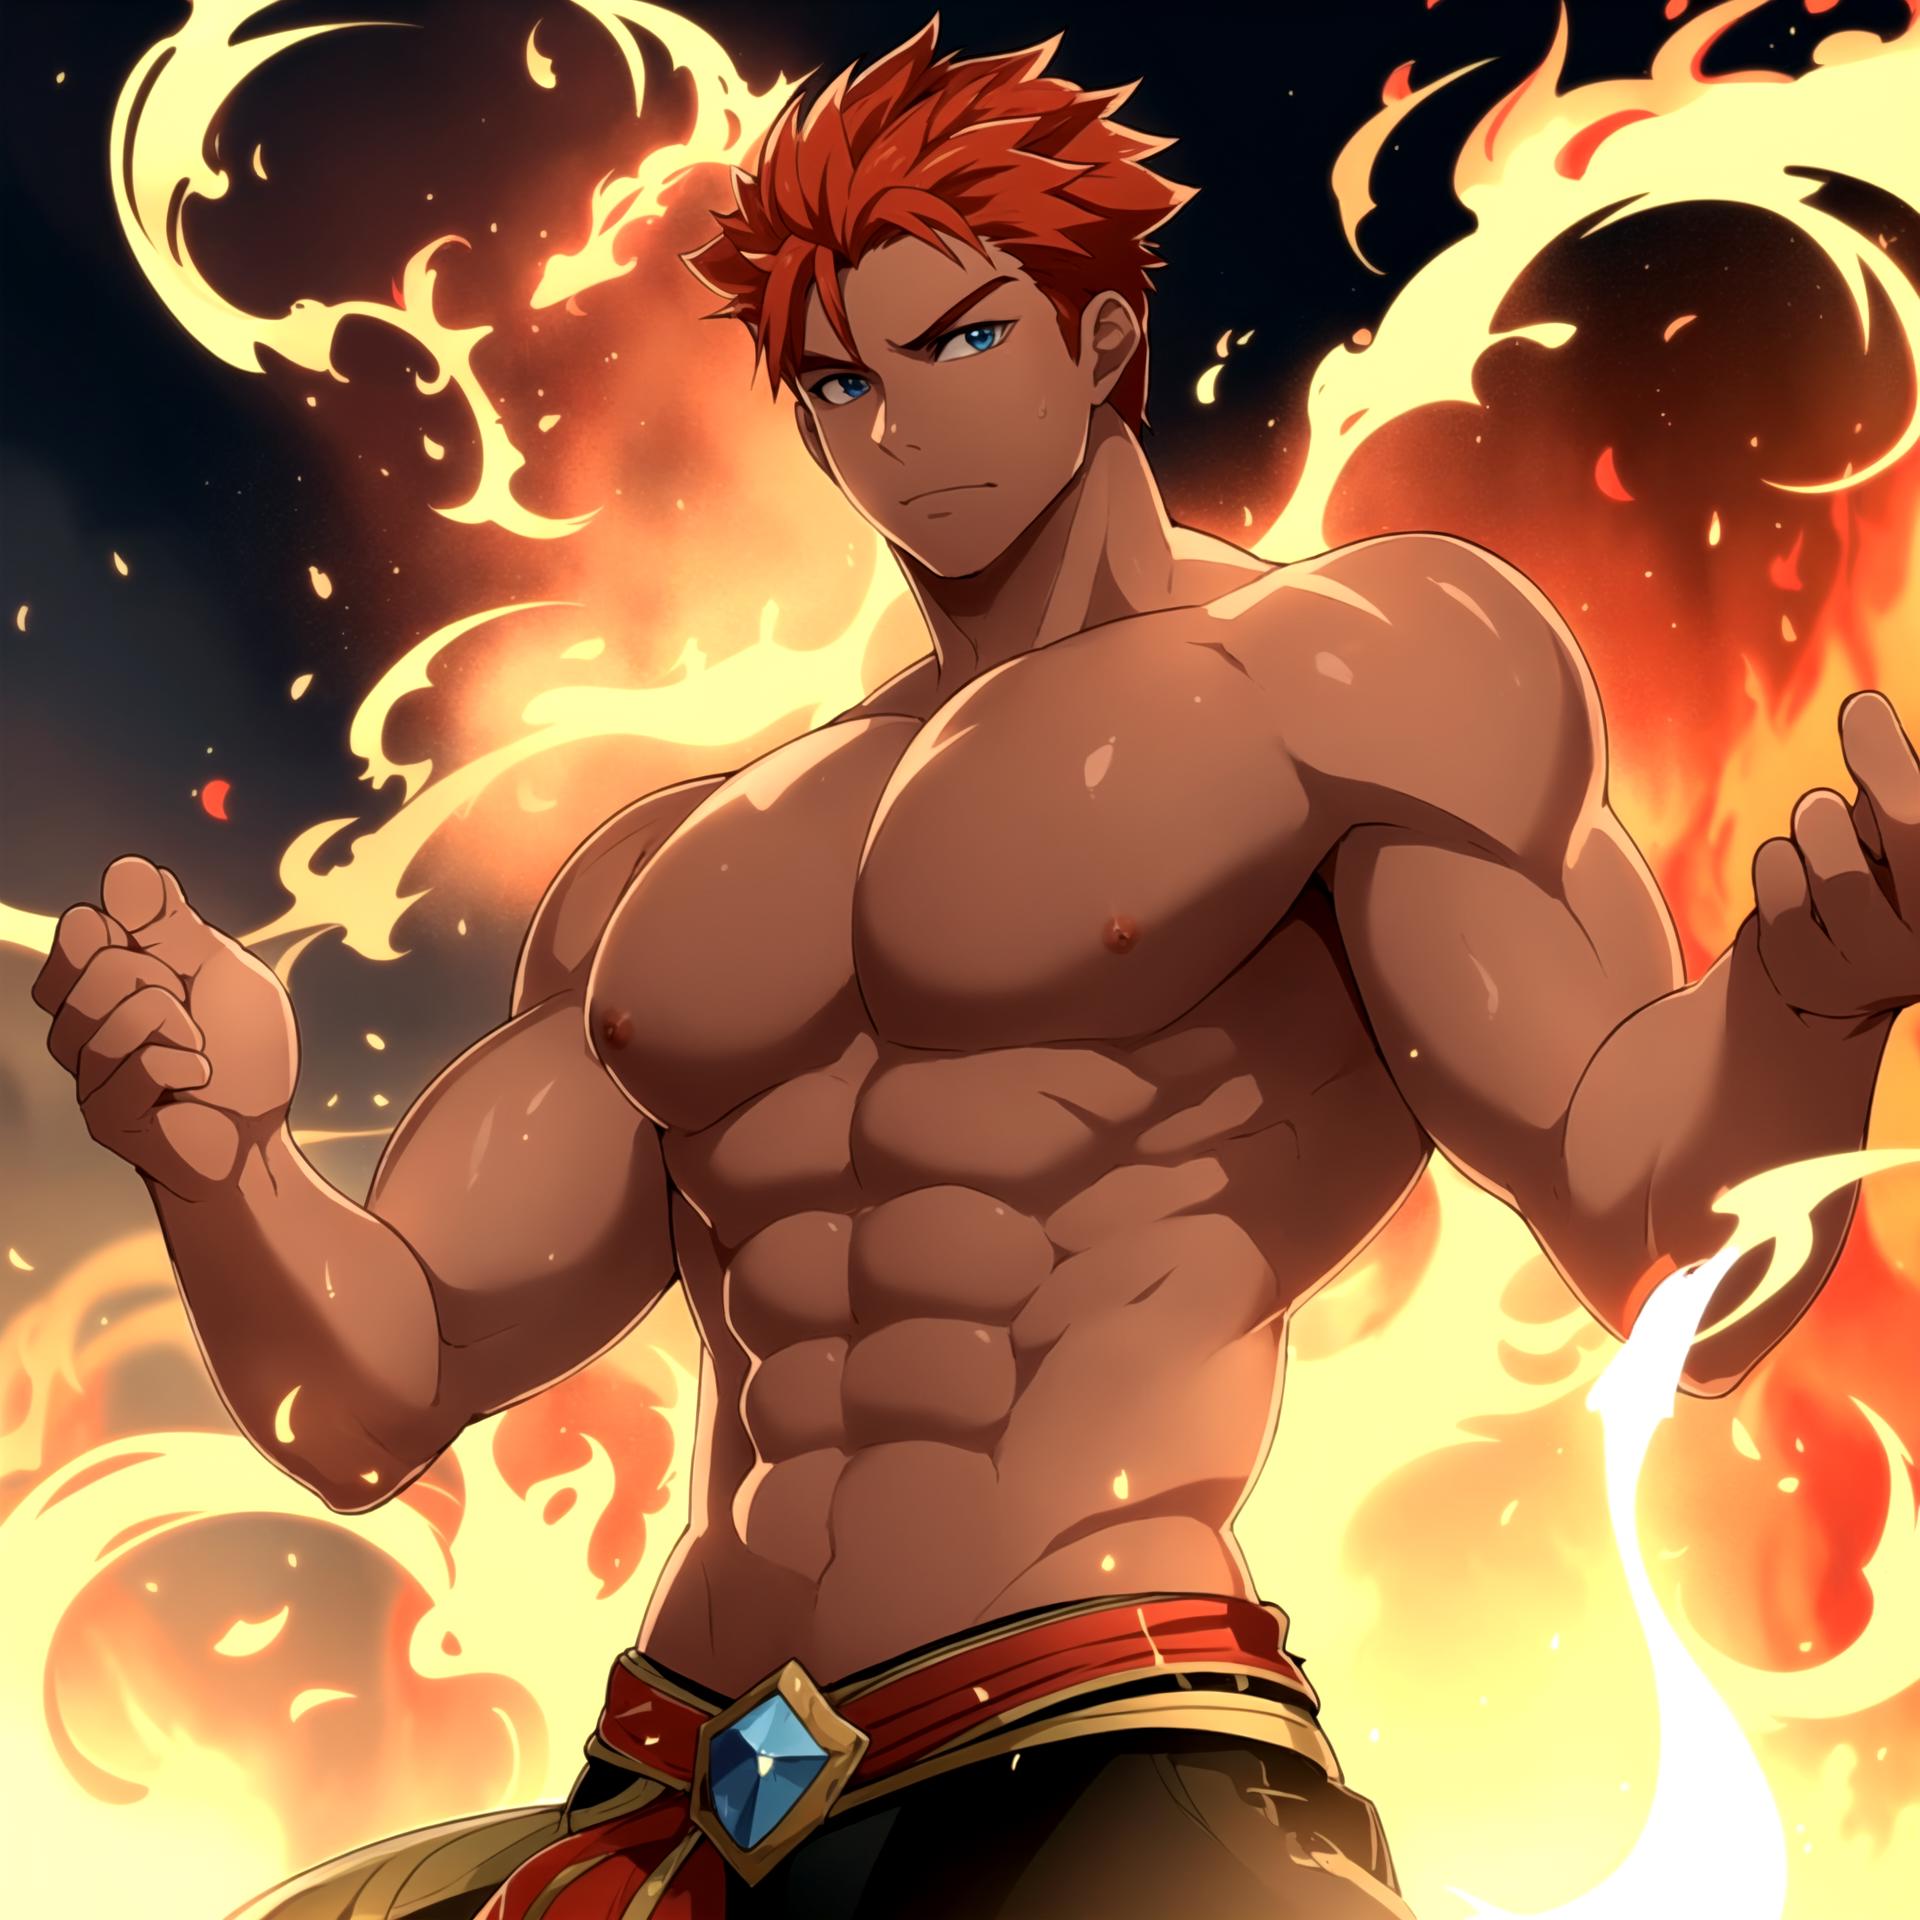 10 Most Muscular Characters in Anime, Who's The Most Well-Built?, muscles  anime